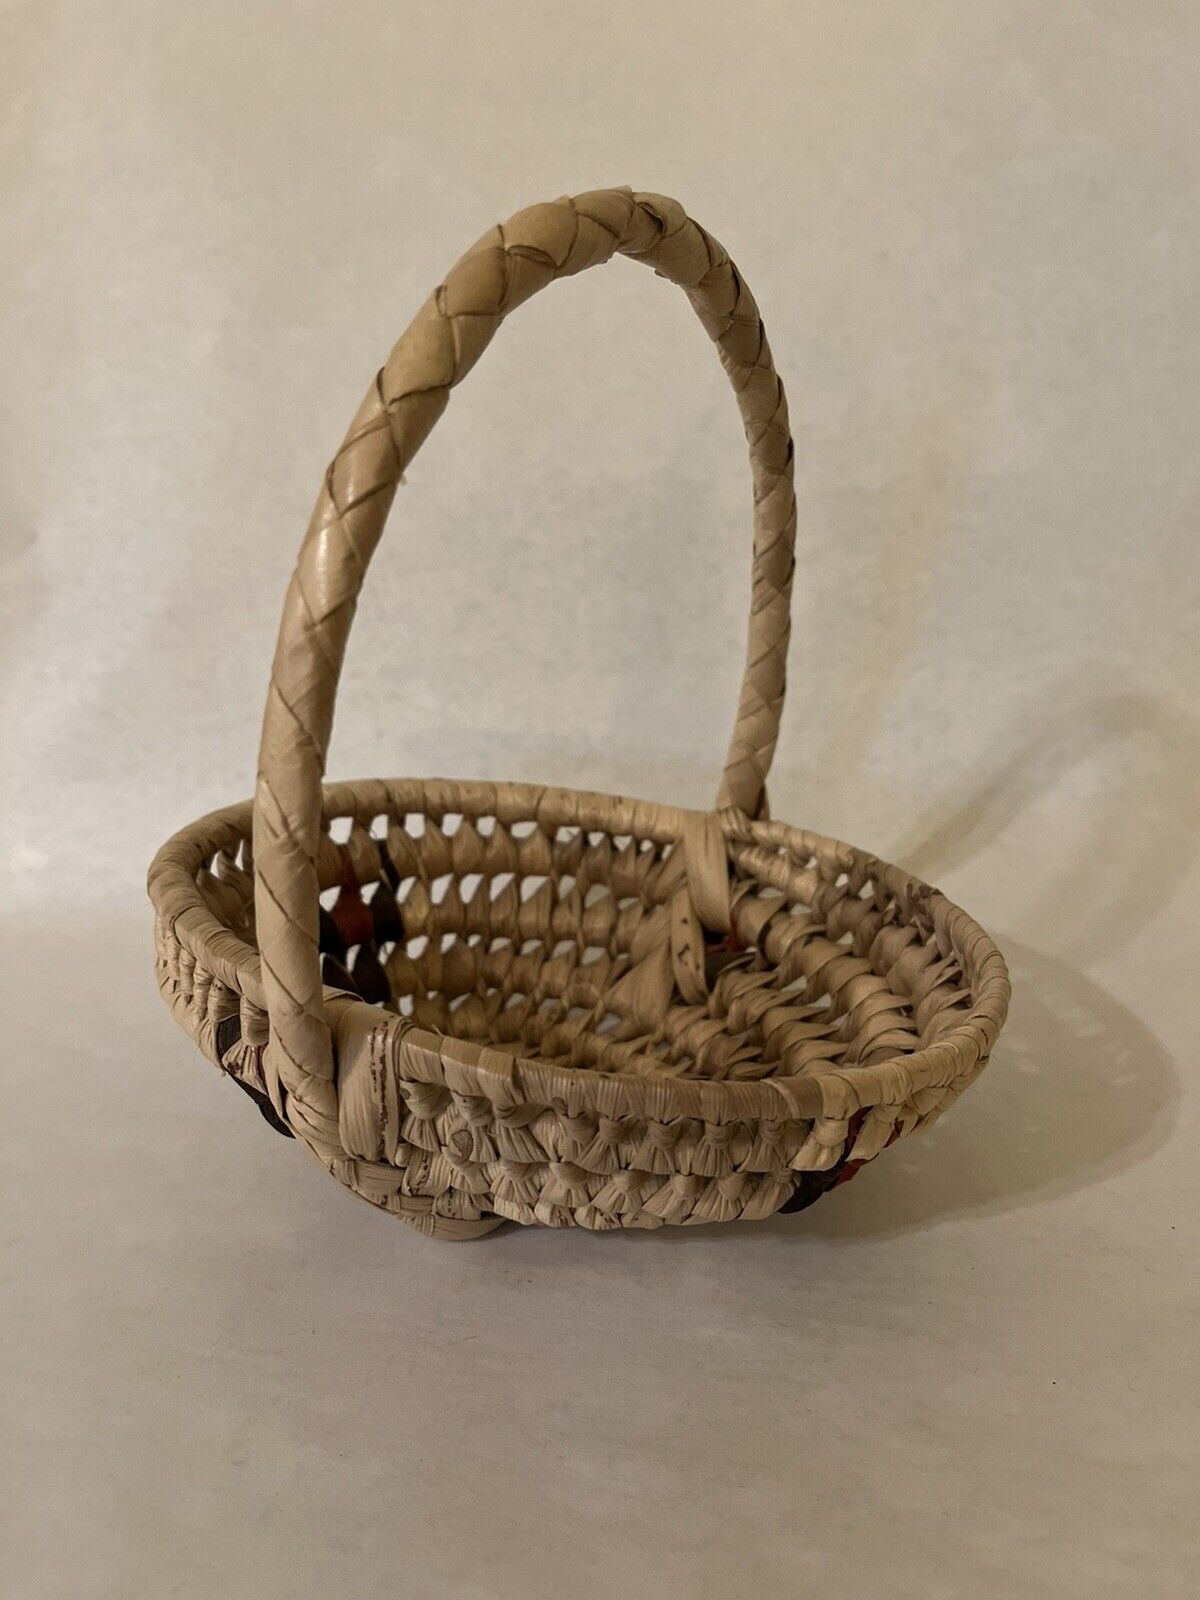 Small Fiji handmade handcrafted basket Fijian Rustic Crafted Purchased in 2005